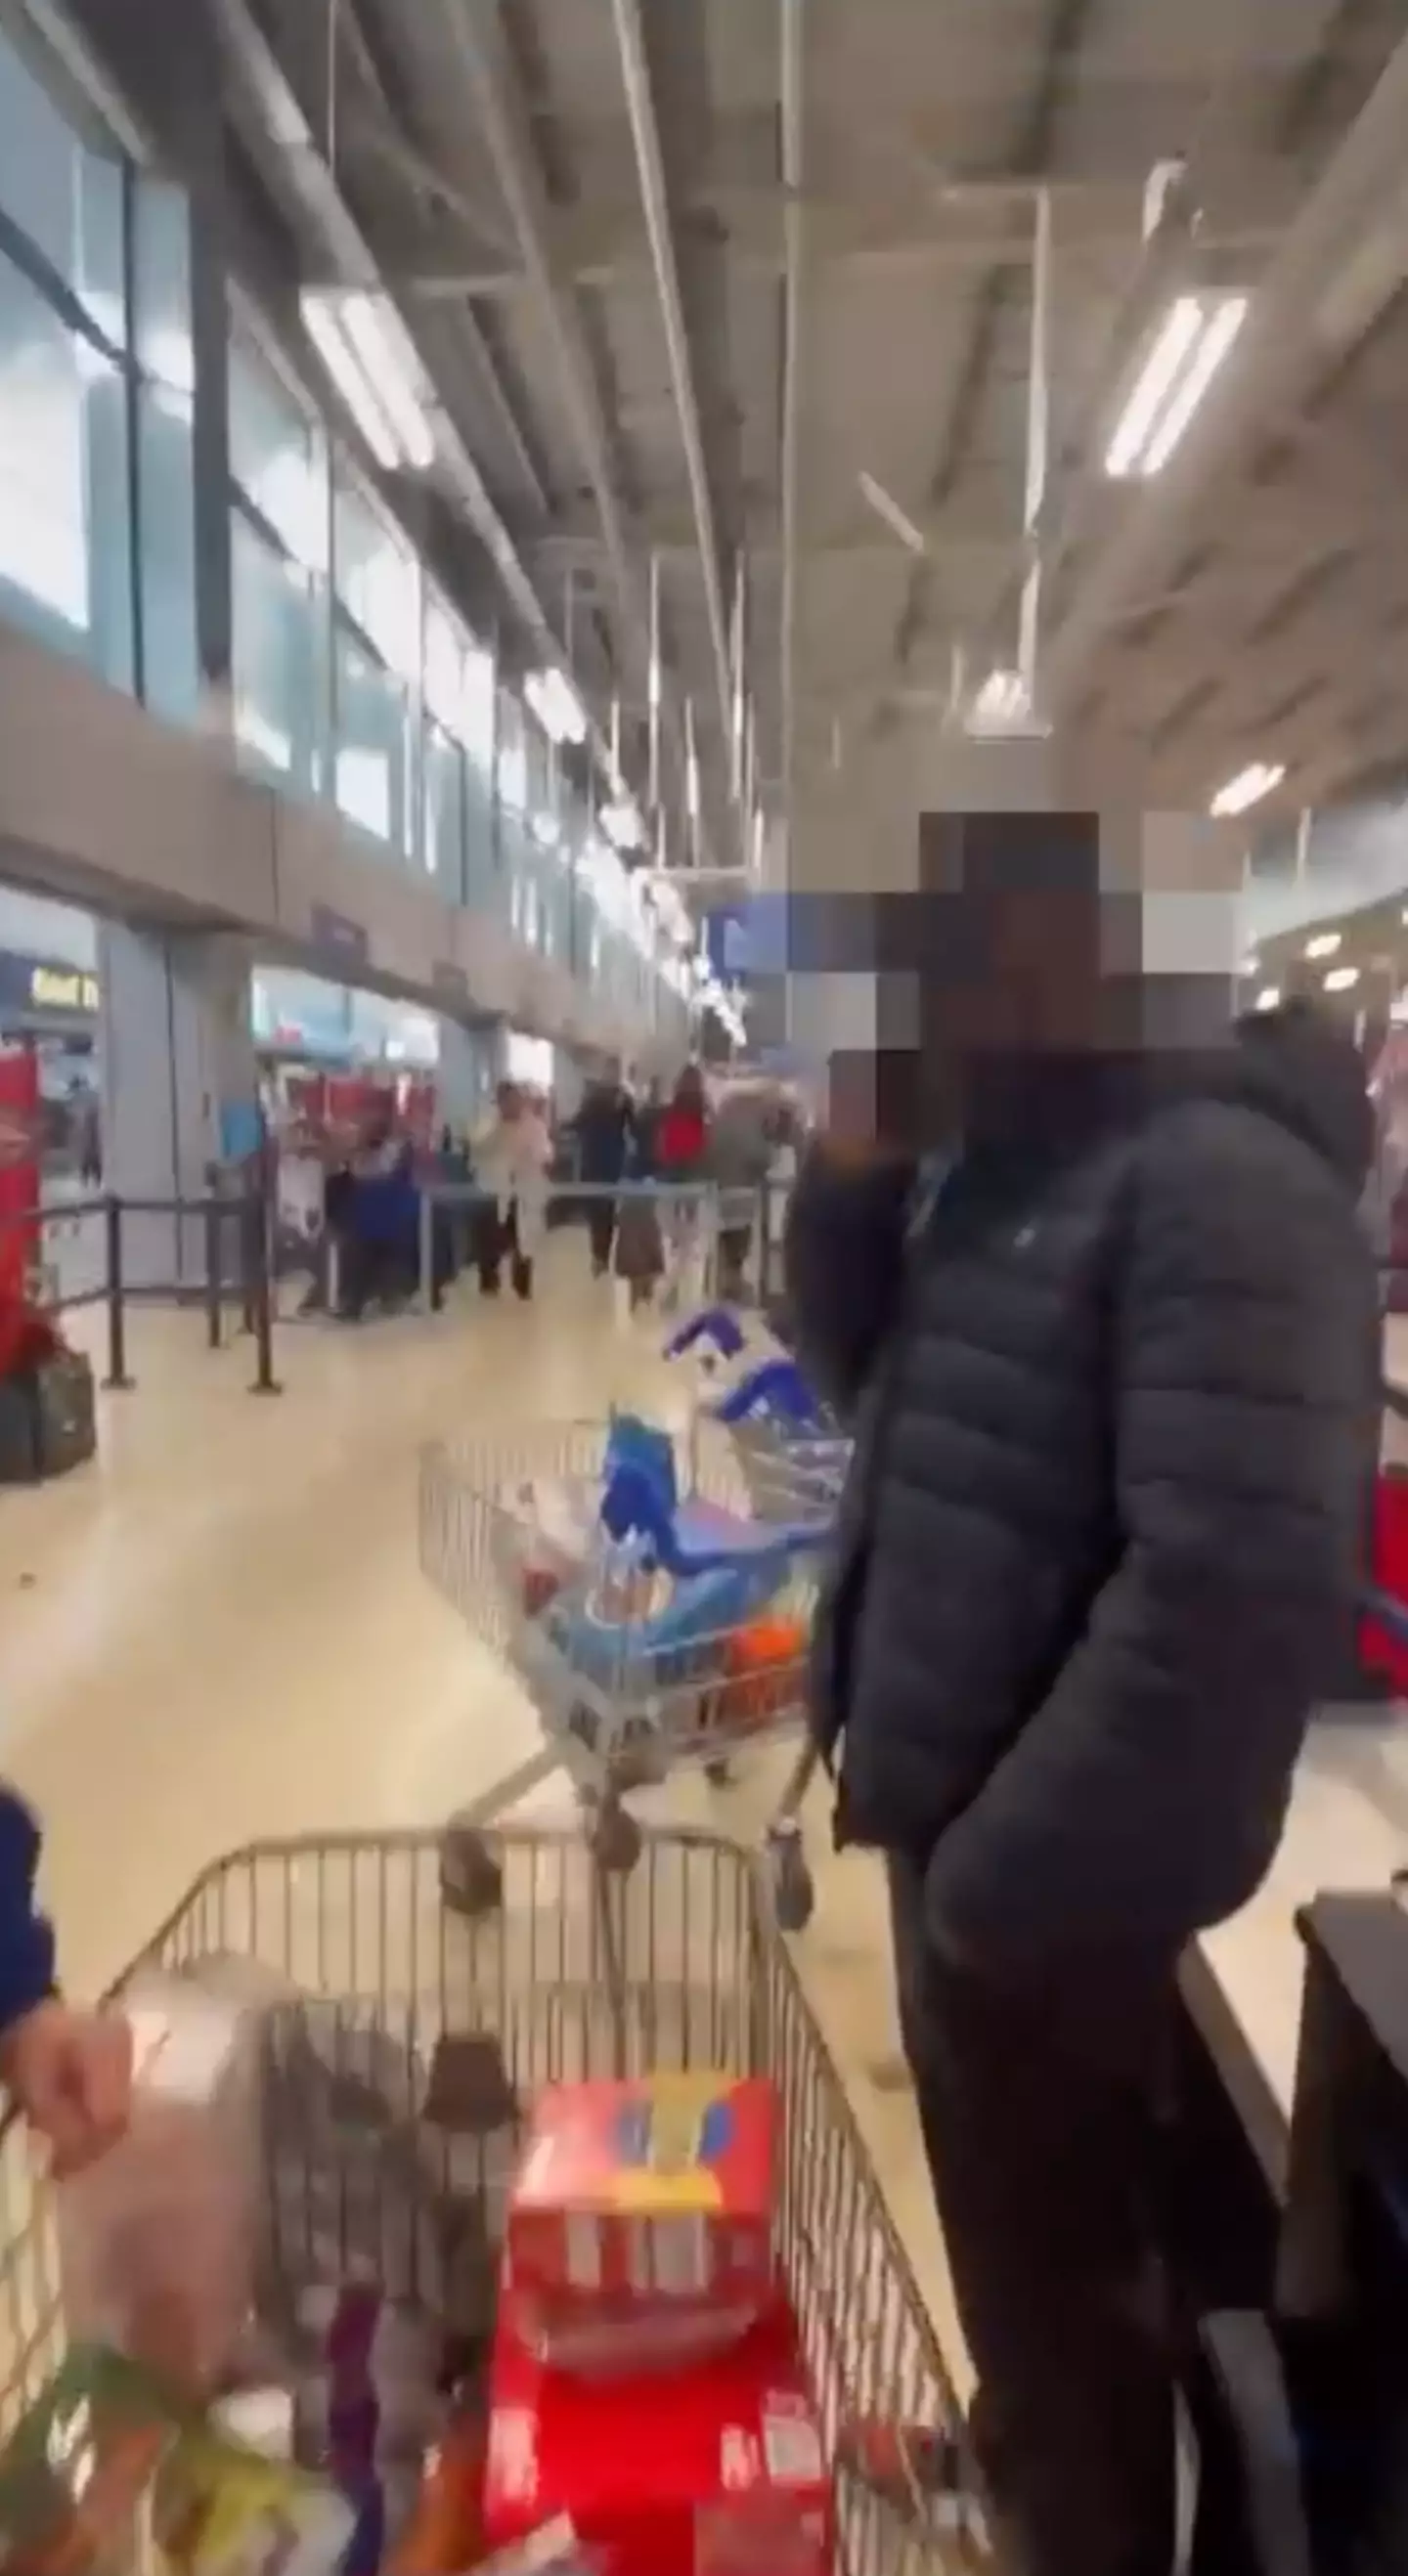 One of the people who identified themselves as Tesco employees called the police on Anne Marie.